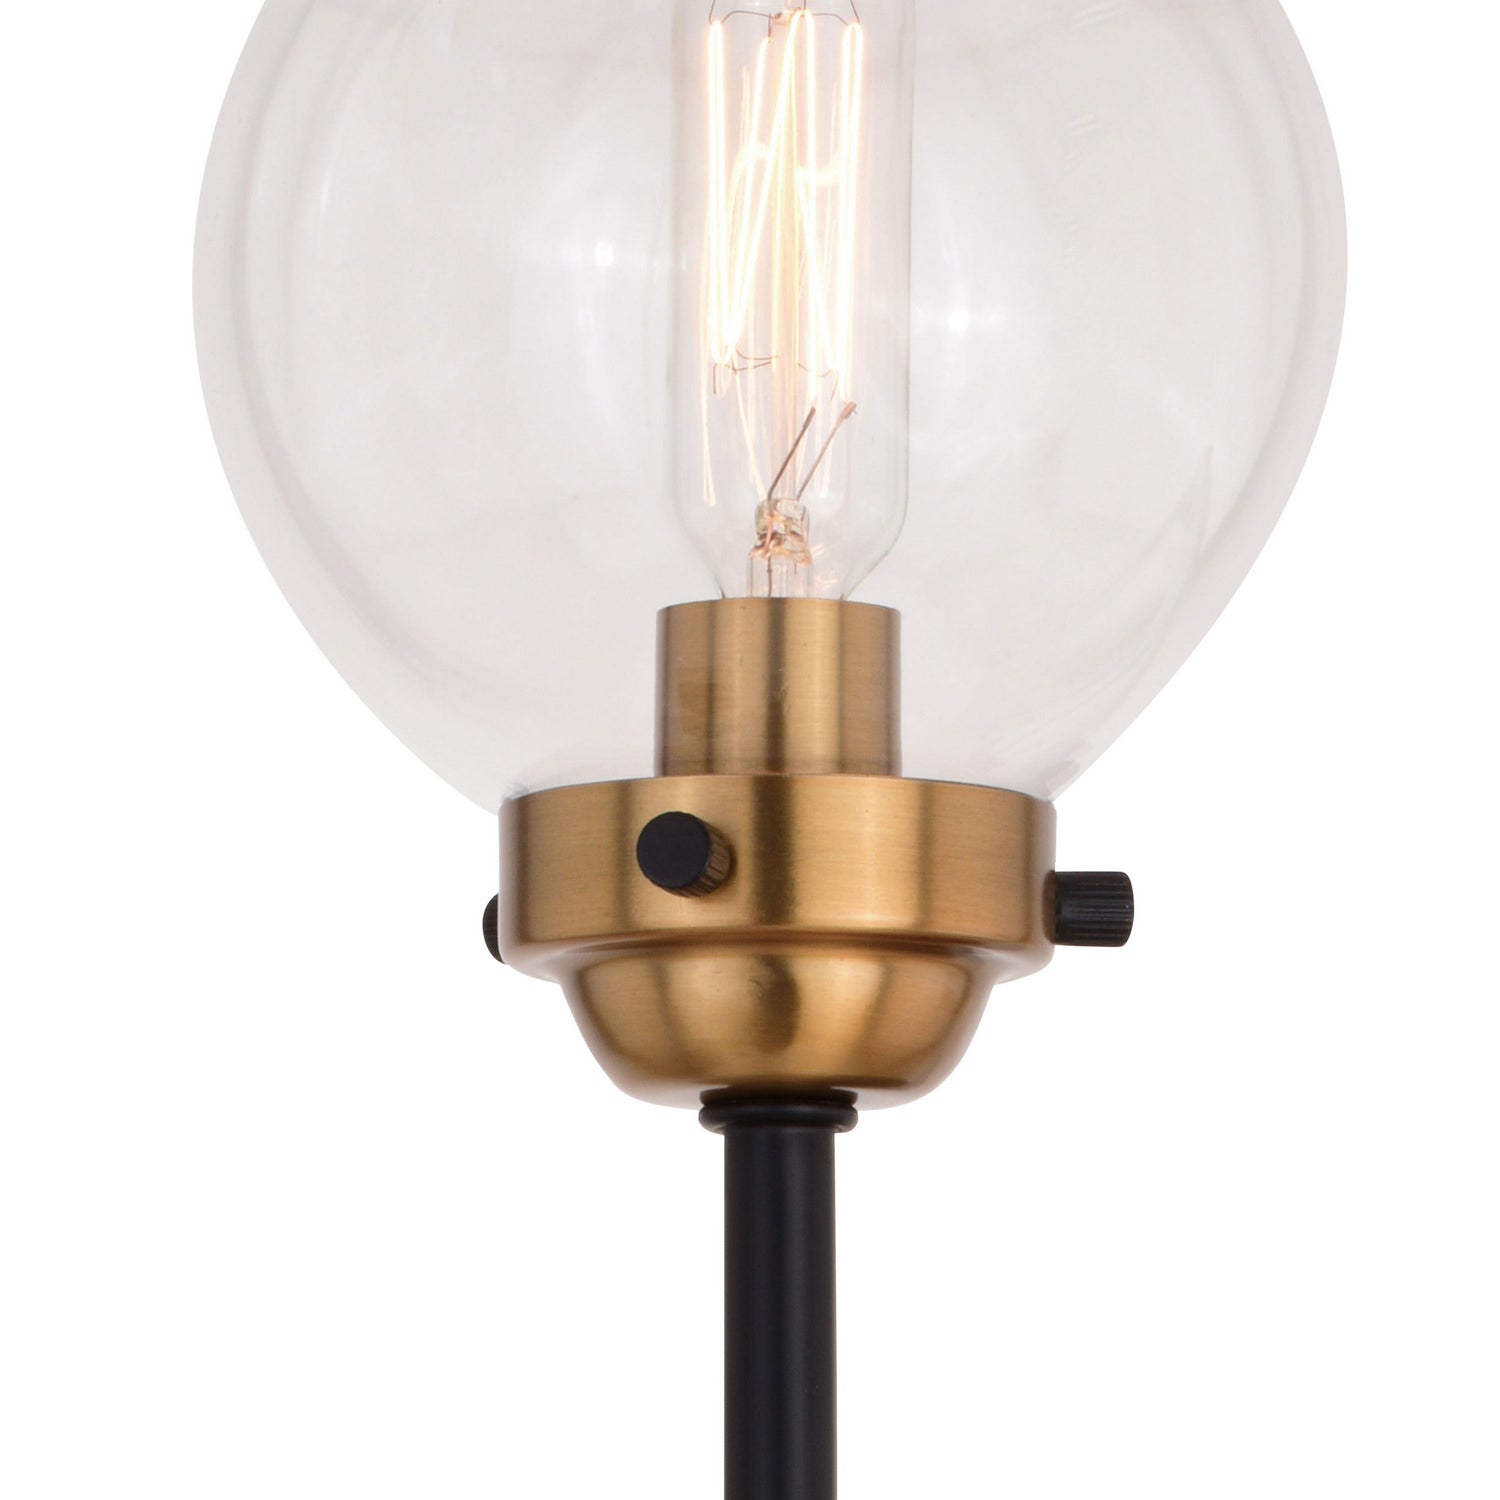 Vaxcel Orbit W0395 Wall Light - Muted Brass and Oil Rubbed Bronze